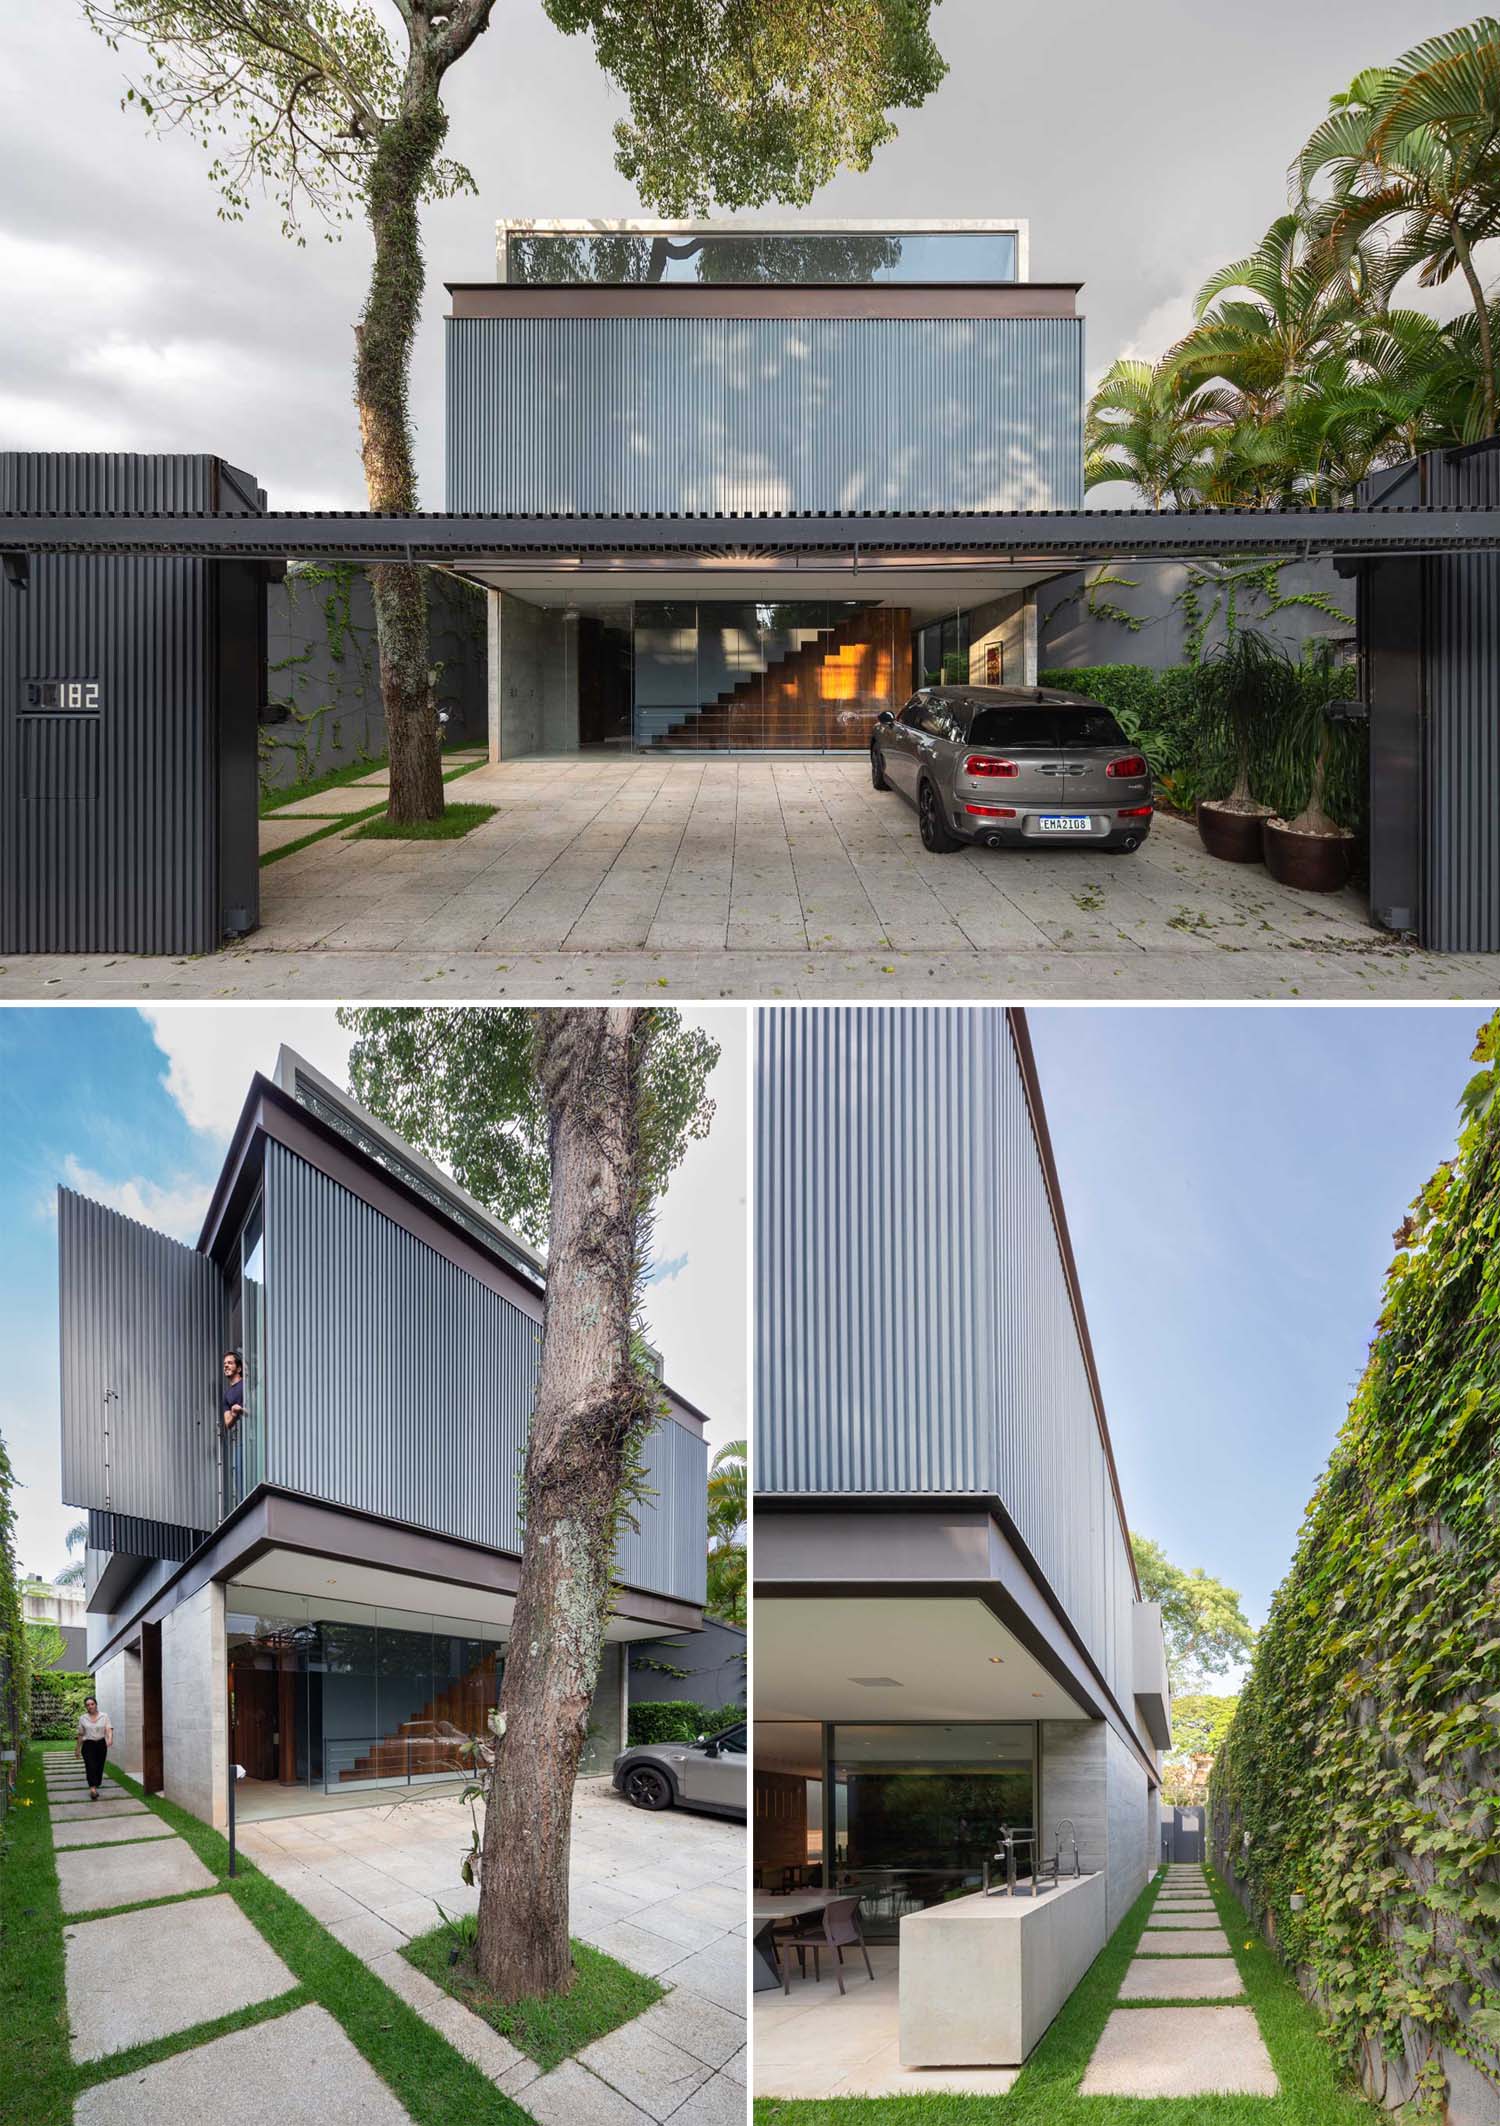 The front of this modern house showcases an upper level that's encased in metal, adding privacy to the home.